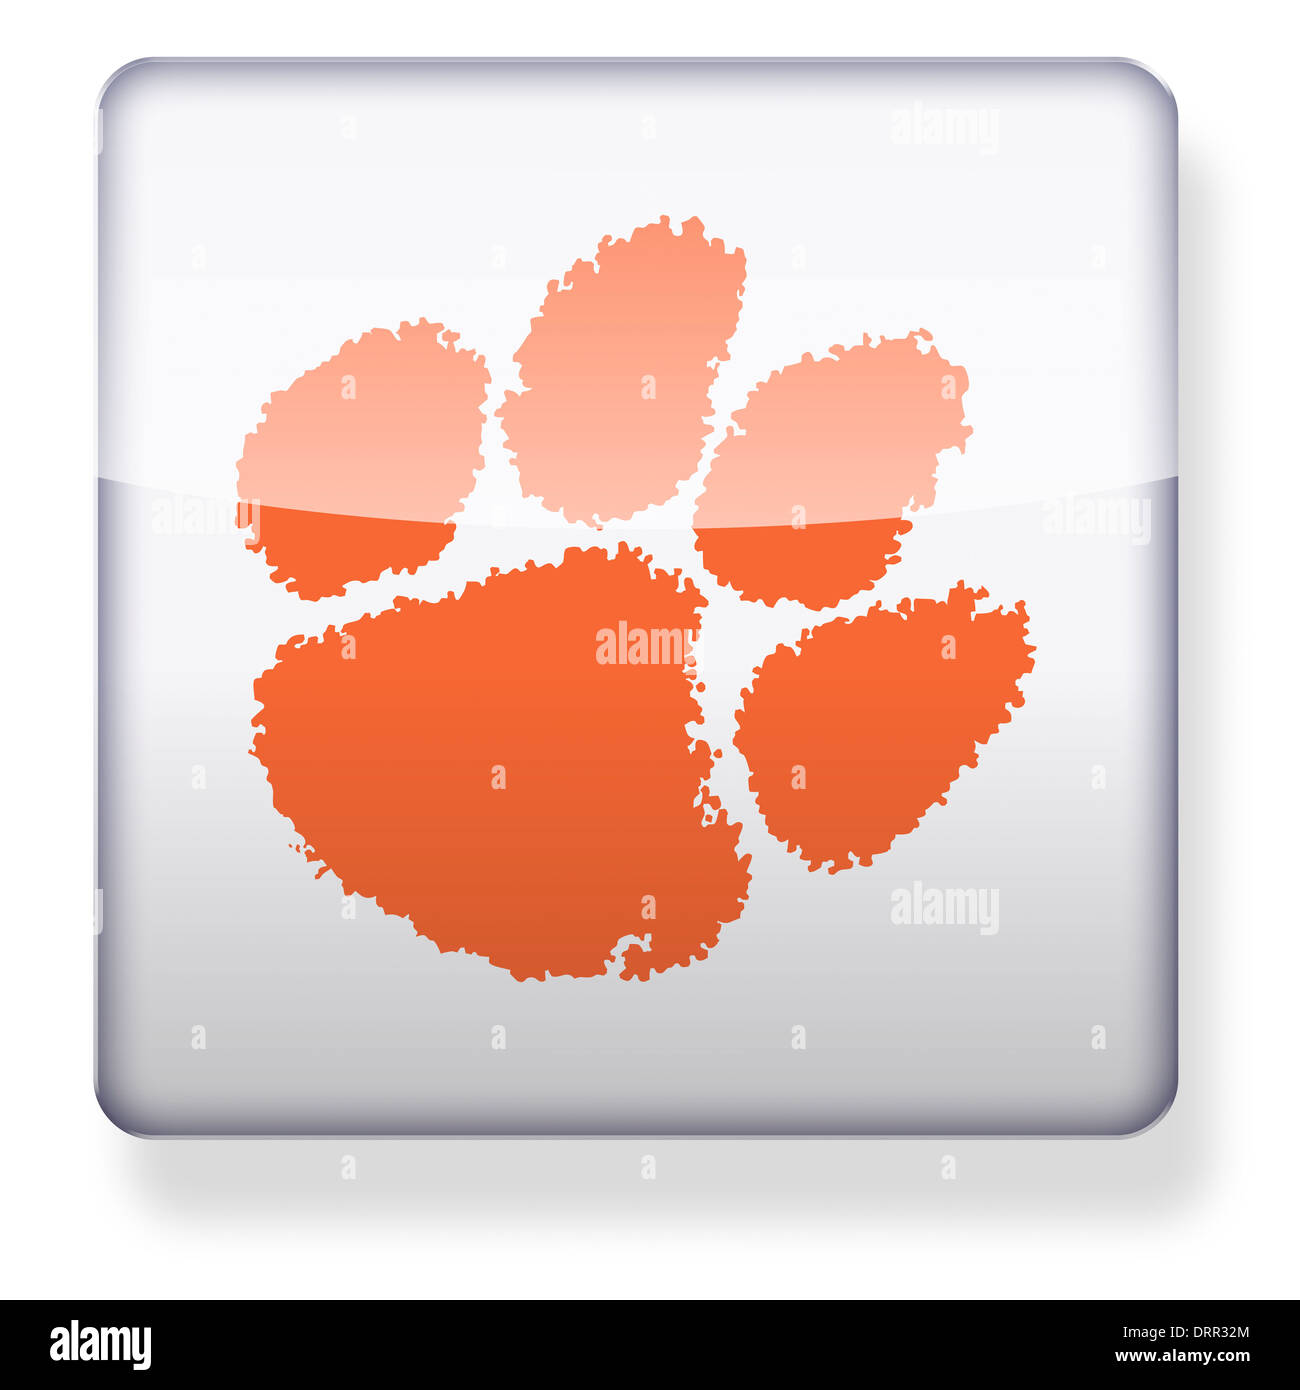 Clemson Tigers Us College Football Logo As An App Icon